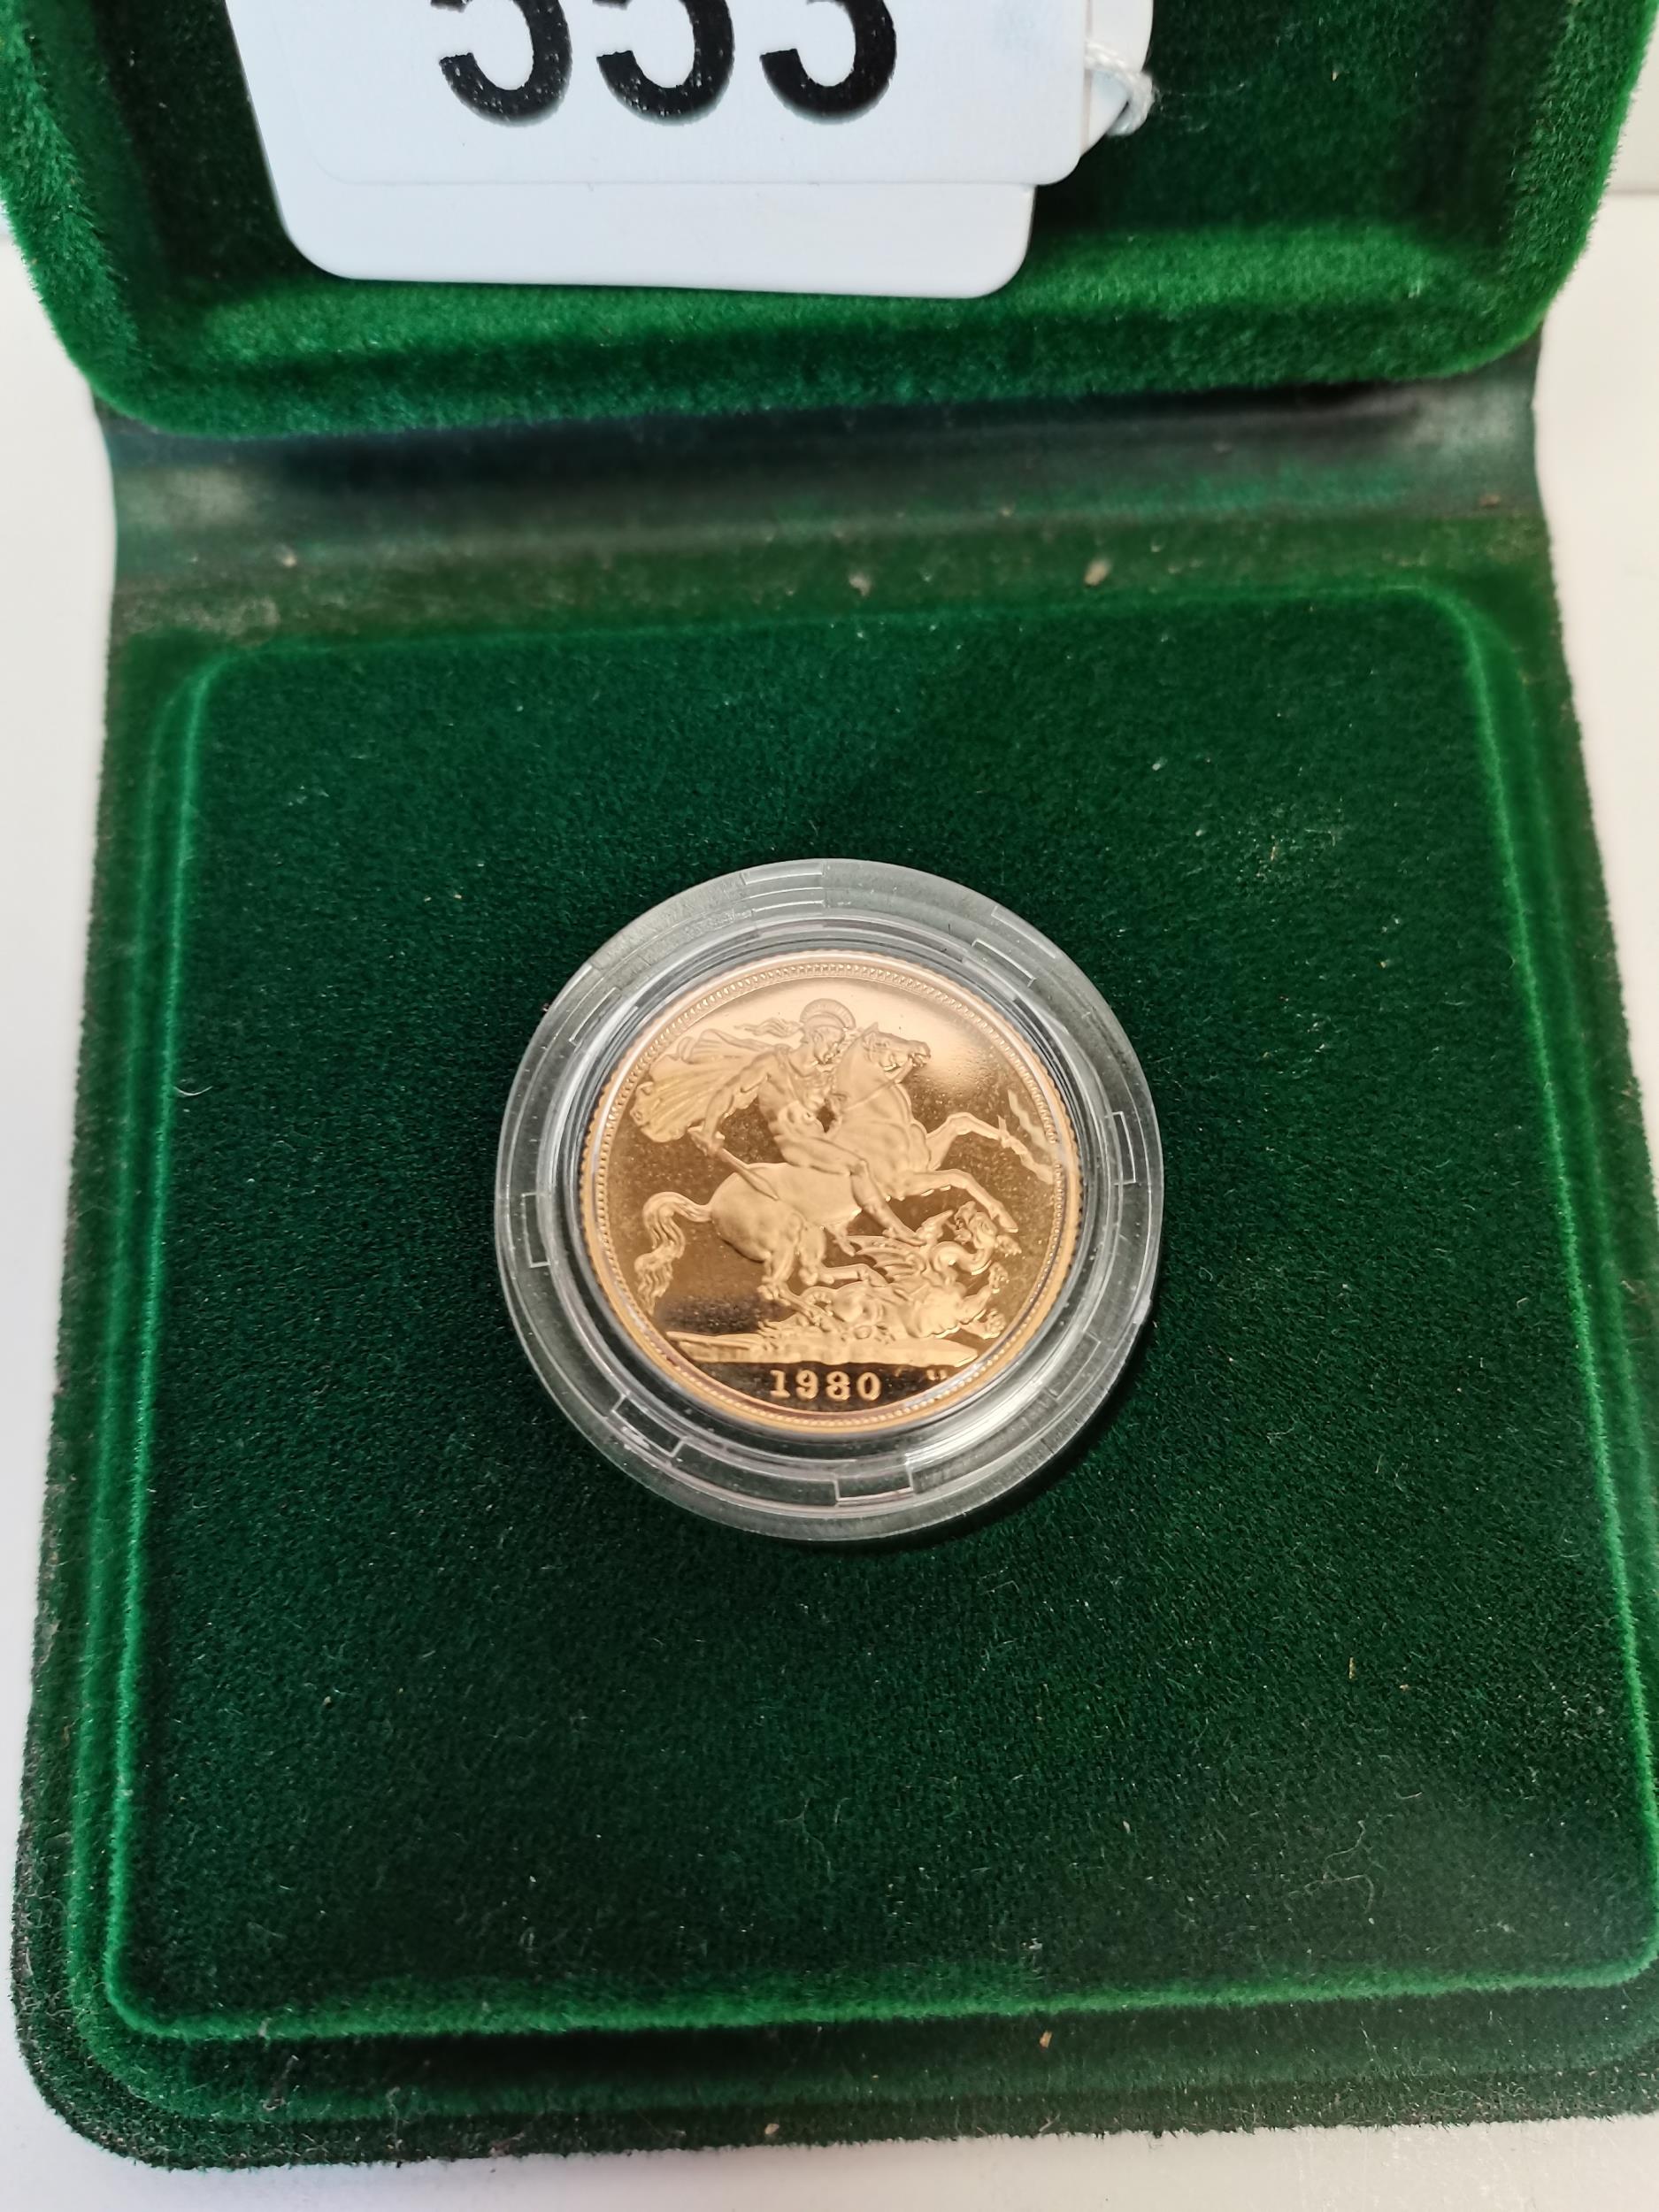 1980 proof sovereign - Image 2 of 2